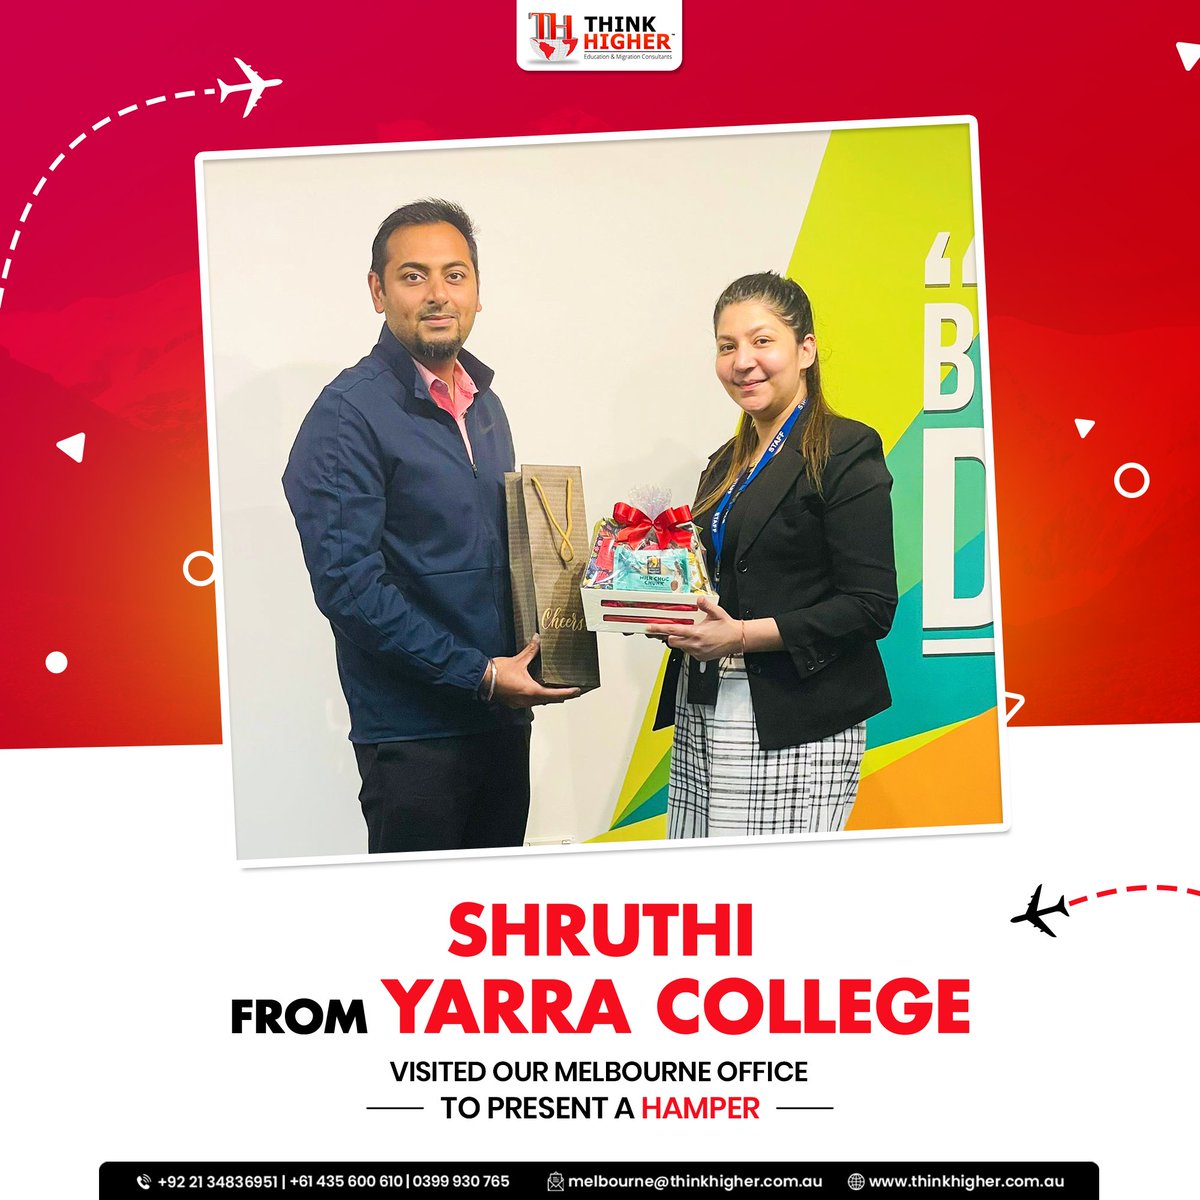 Grateful for Shruthi's visit from Yarra College to our Melbourne branch, spreading joy with a heartwarming hamper. #CommunityConnections #YarraCollege #MelbourneMoments #collaboration #australianstudies #education #migration #australiacollege #thinkhigher #thinkhigherconsultants